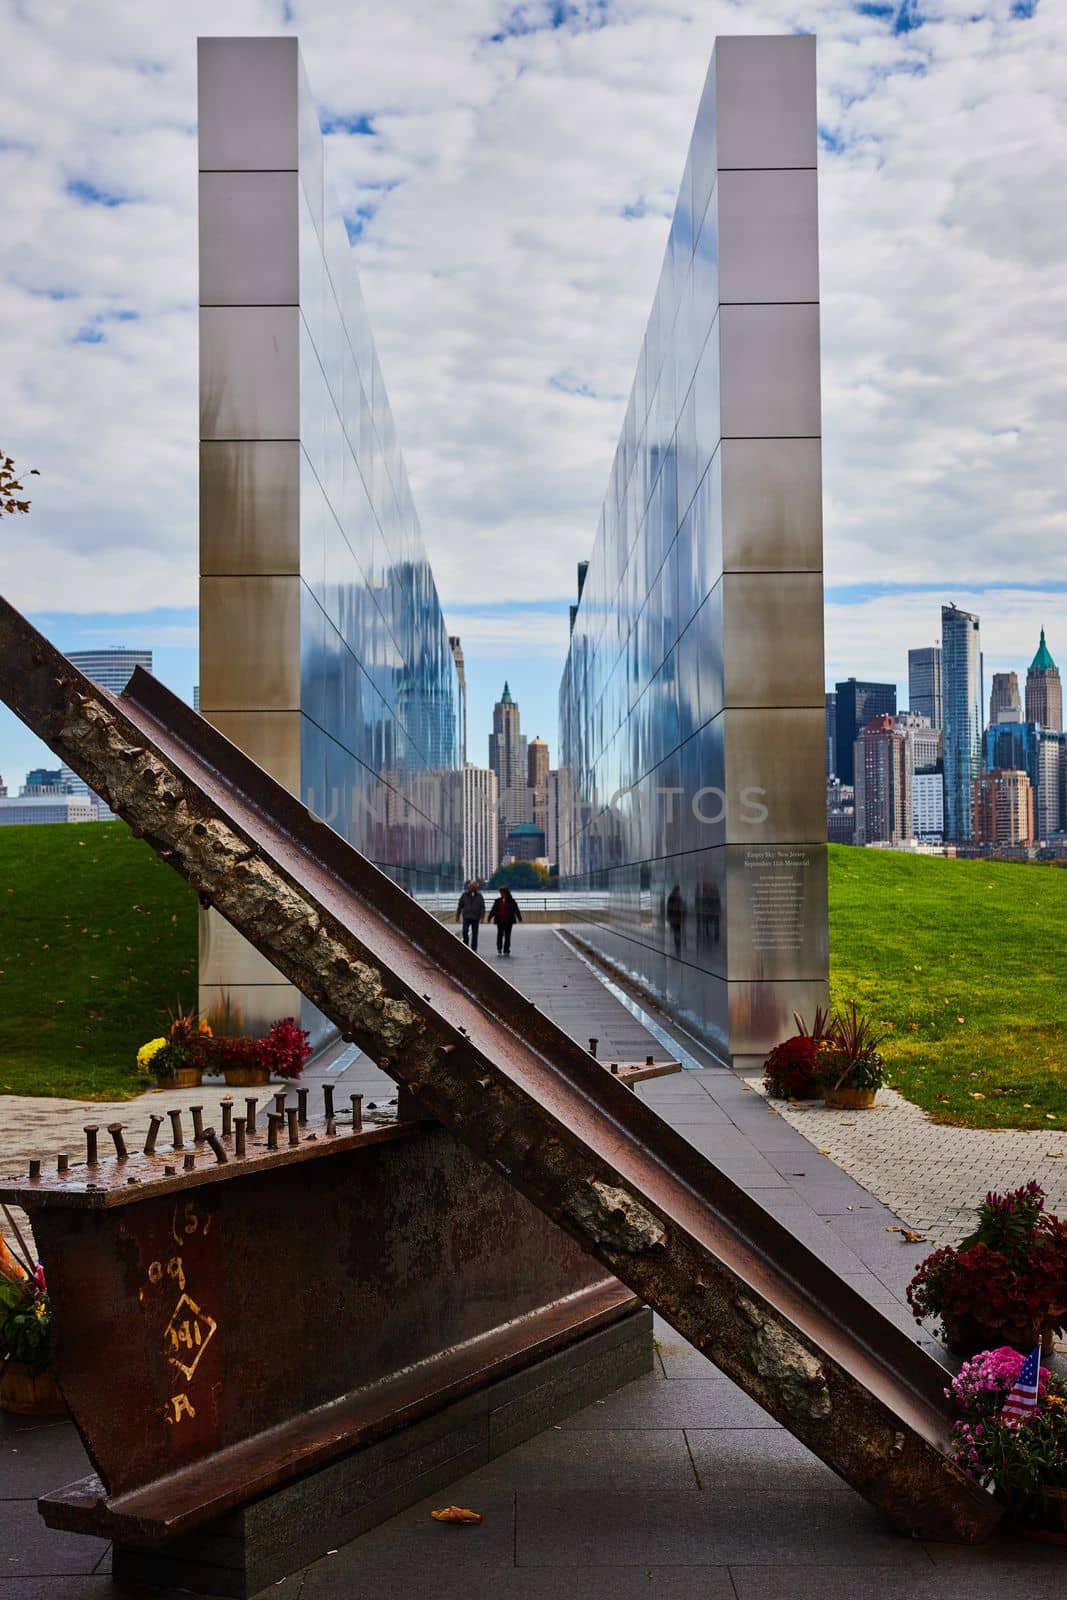 Image of Piece of collapsed steel beam from 9 11 Twin Towers at New Jersey memorial overlooking New York City